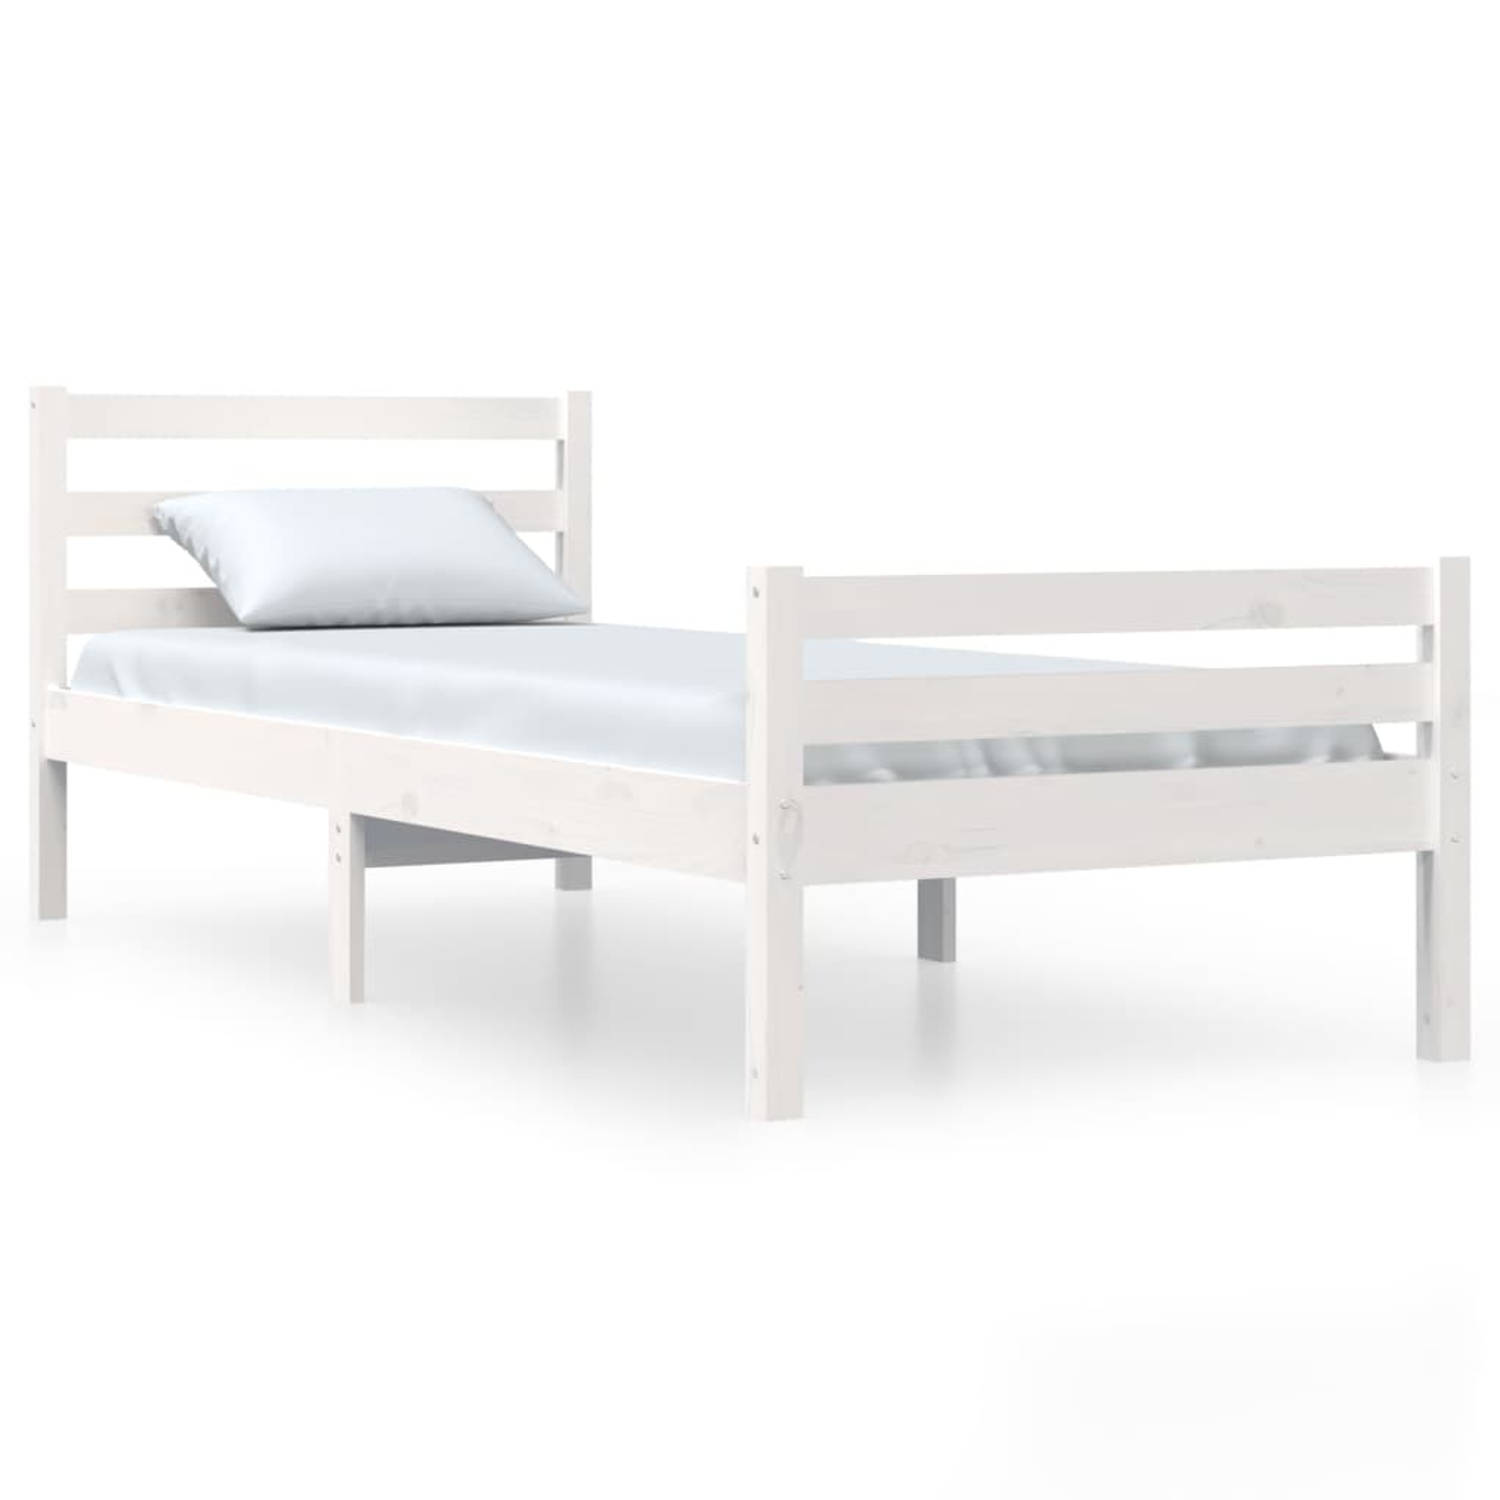 The Living Store Bed The Living Store - Bedframe - Eenpersoons - 90 x 190 cm - Grenenhout - Wit